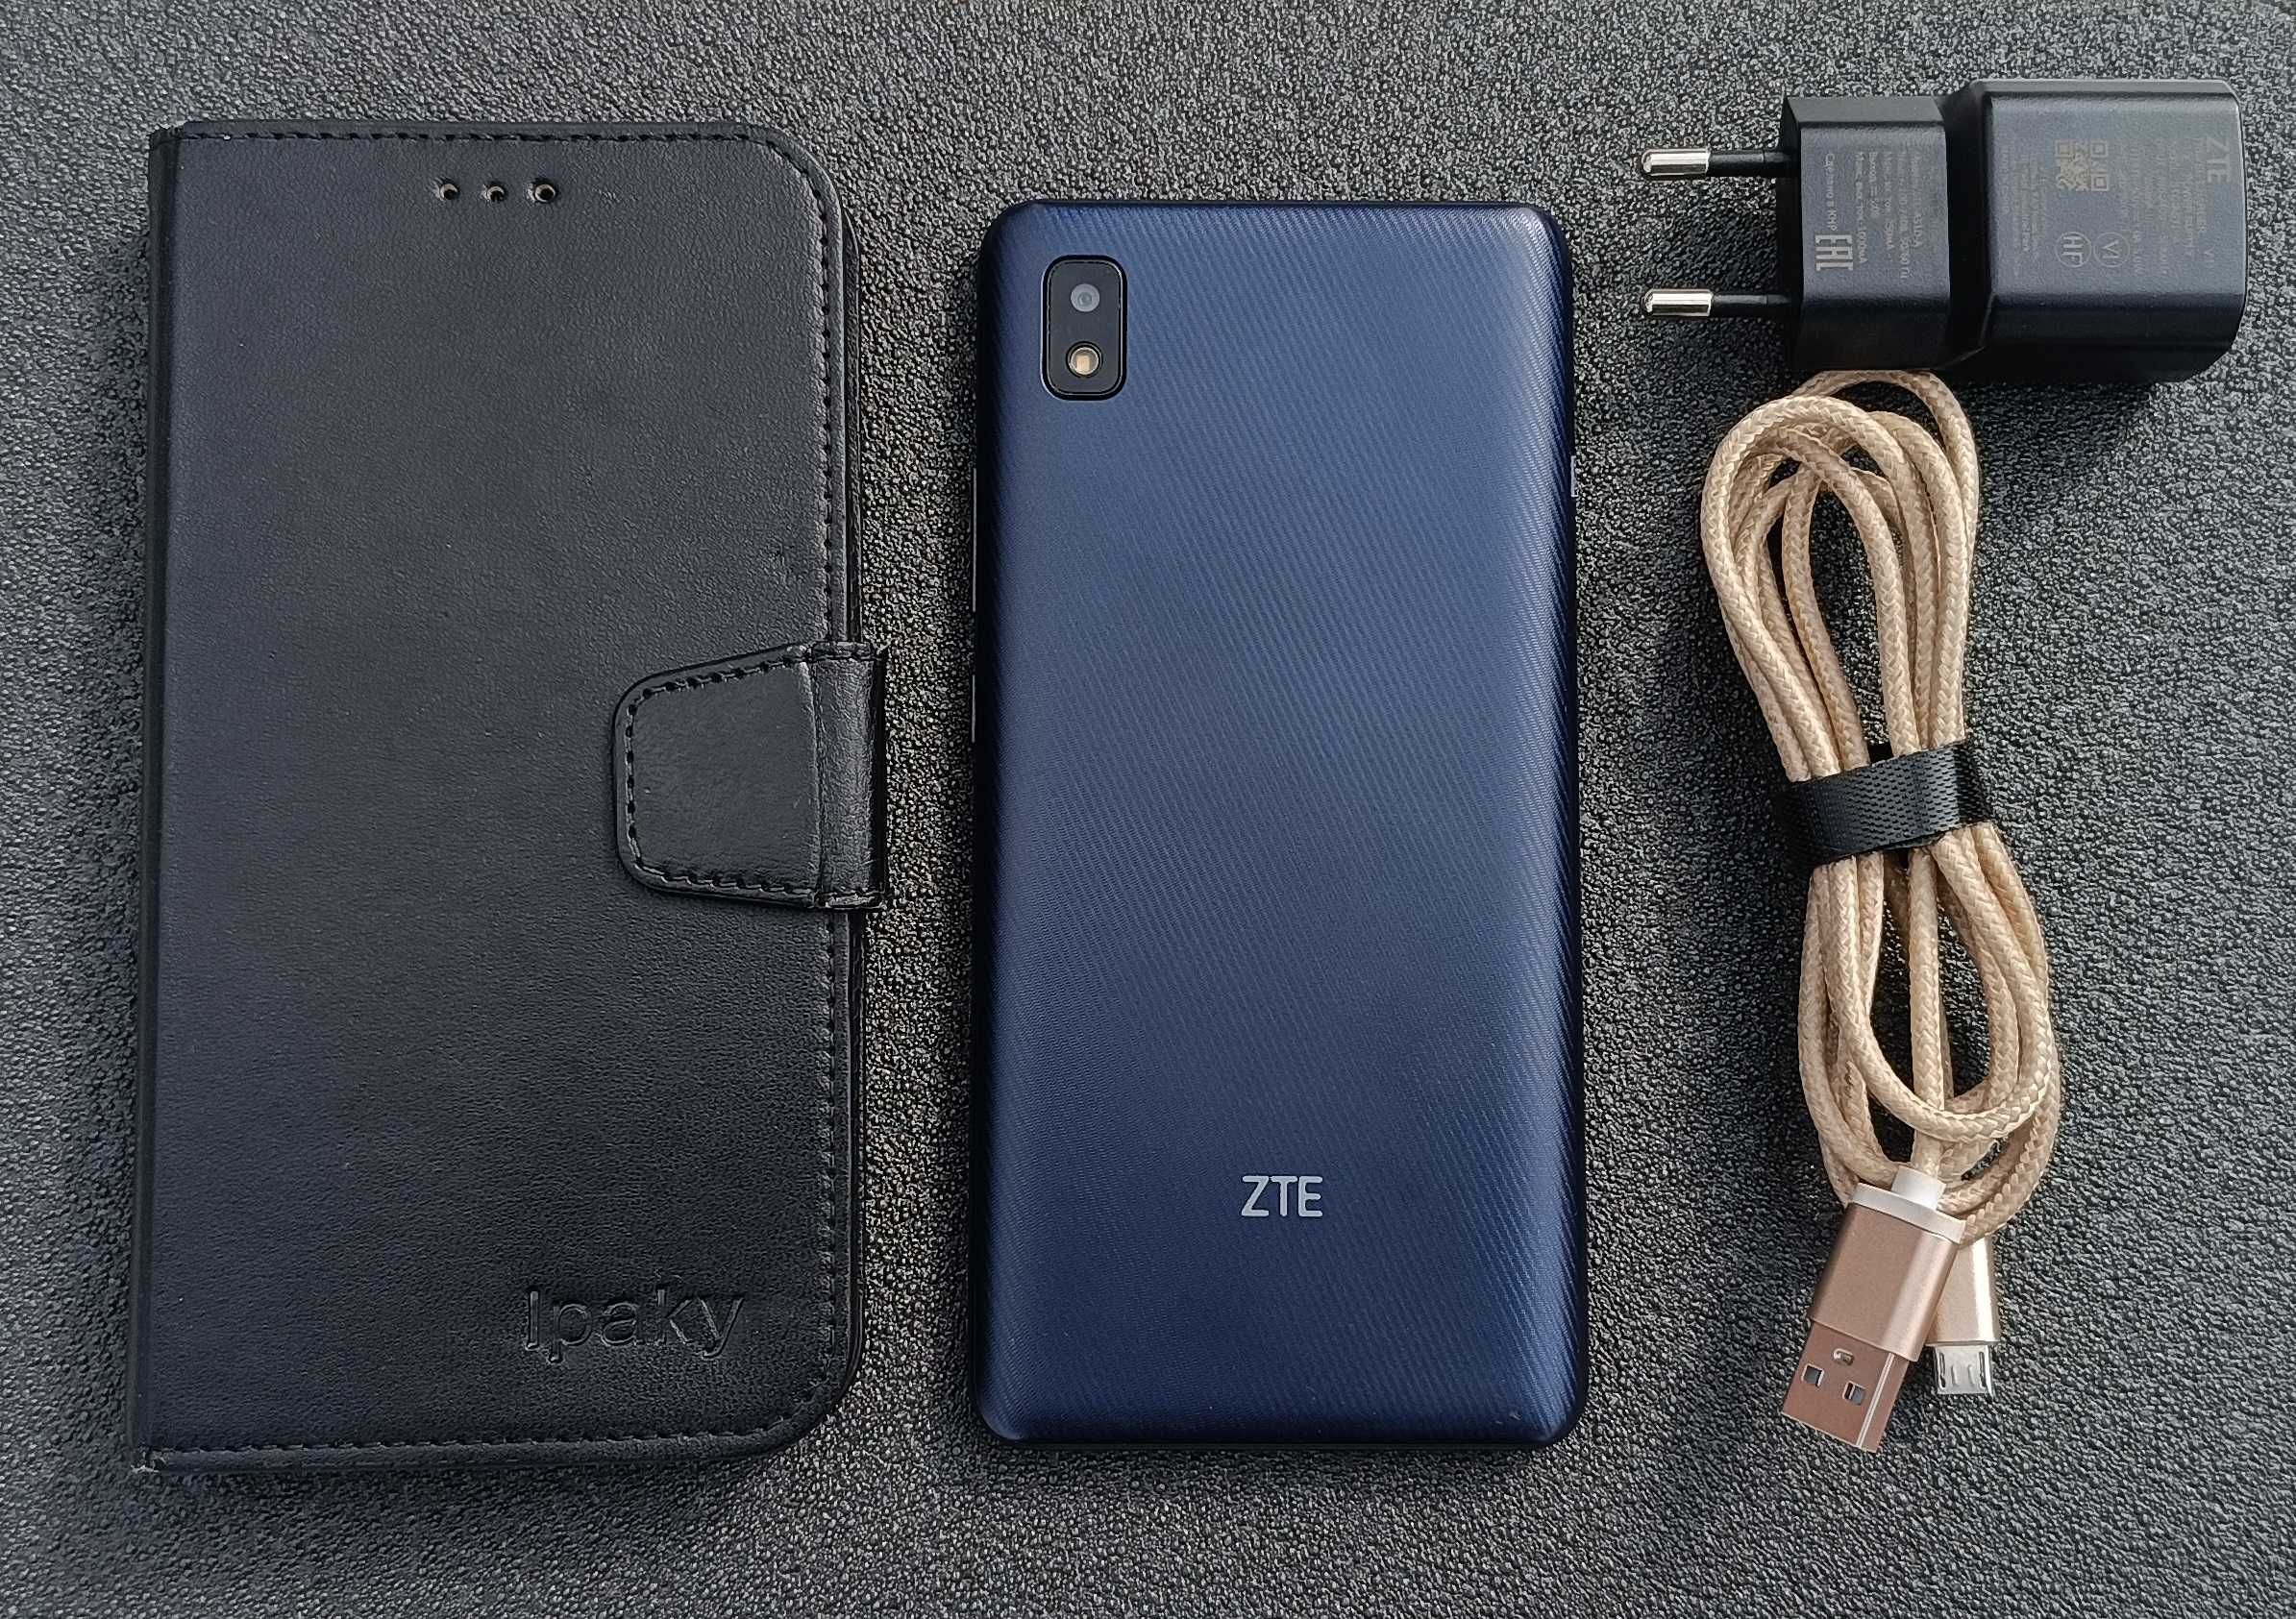 ZTE BLADE L210 Blue 1/32 GB Android 10